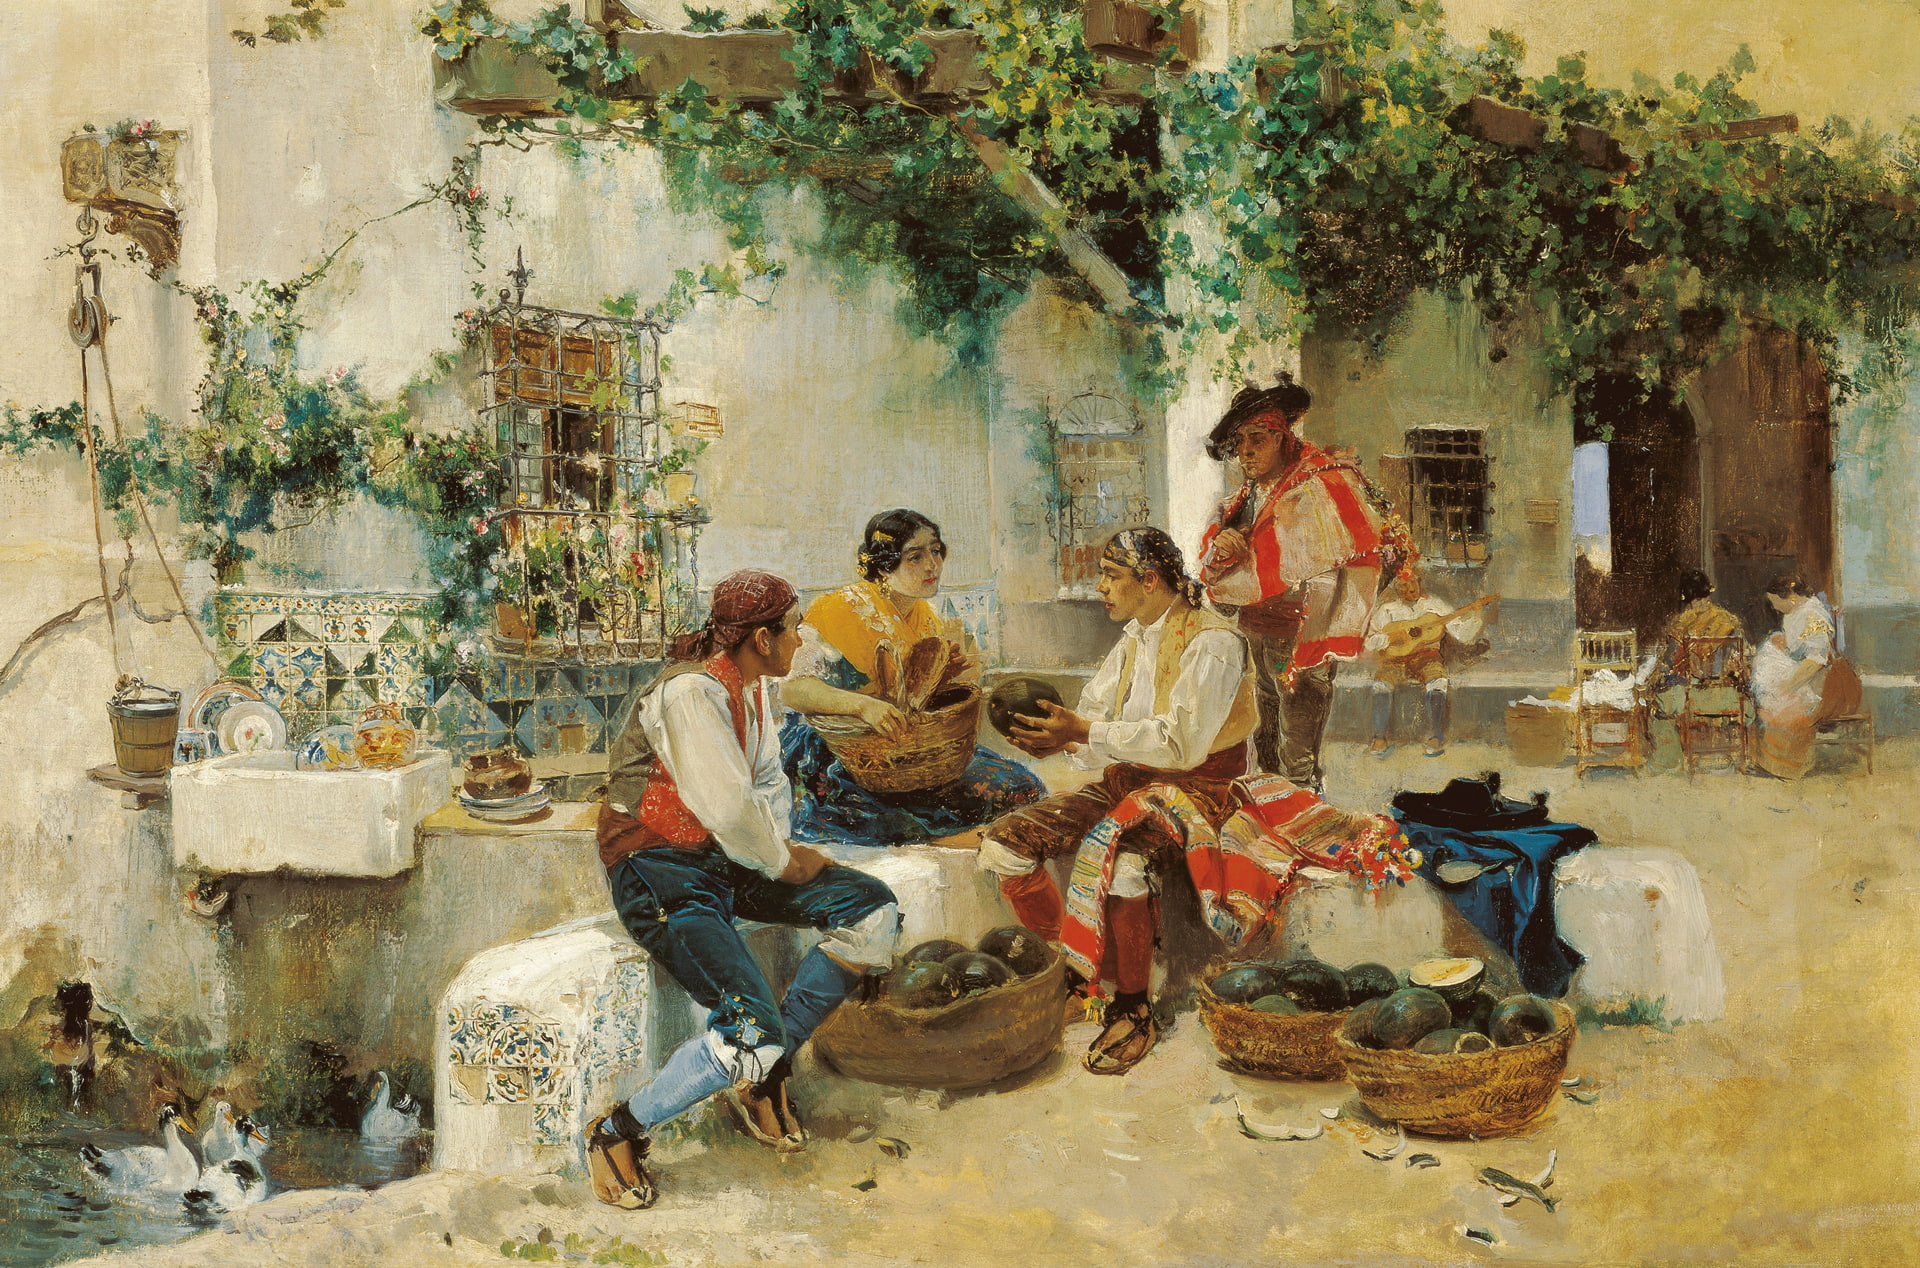 the city, house, people, picture, trade, genre, Joaquin Sorolla